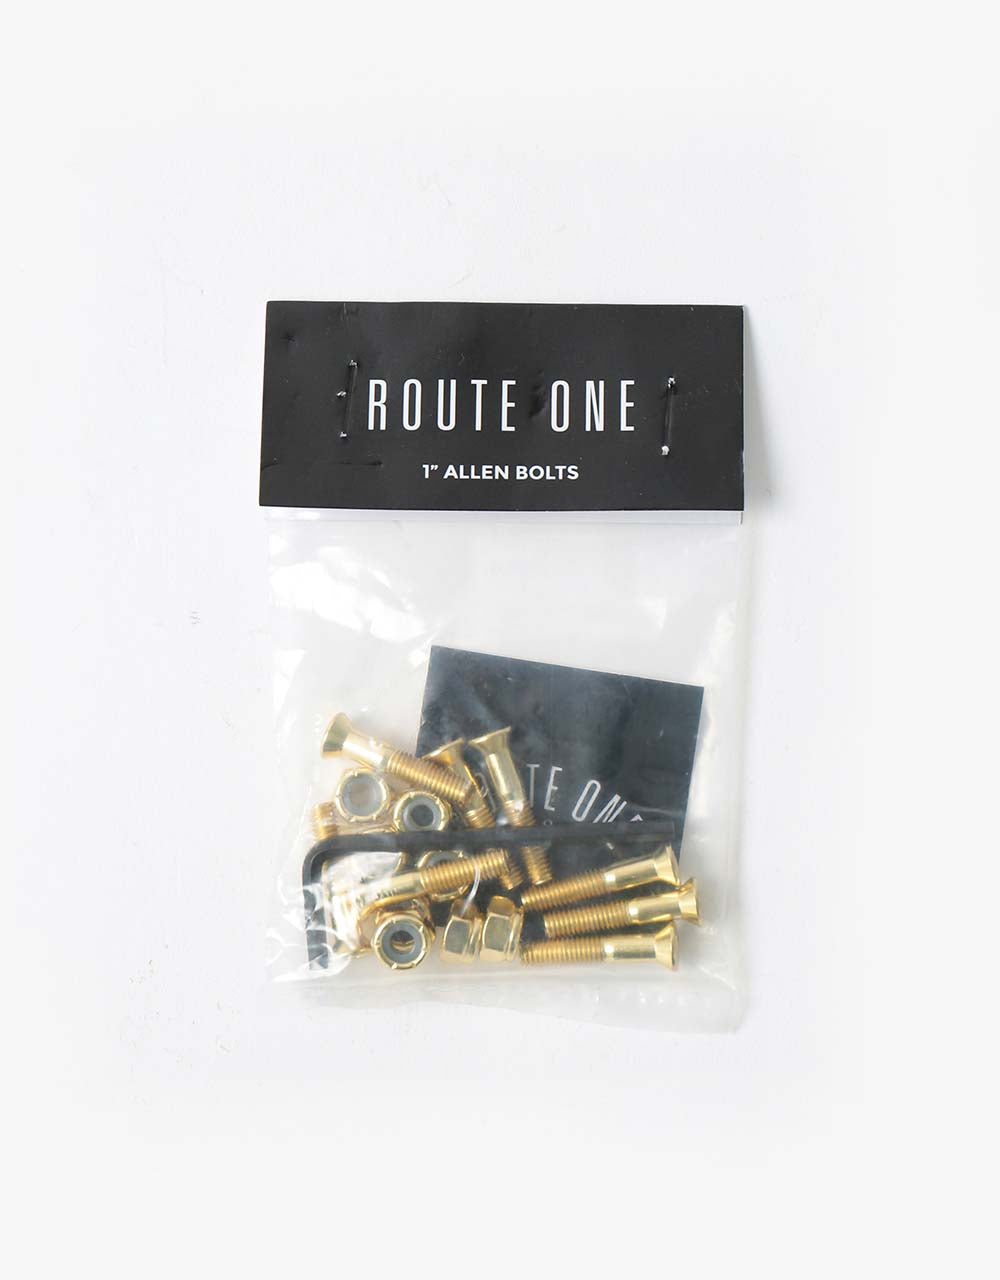 Route One 1" Allen Bolts